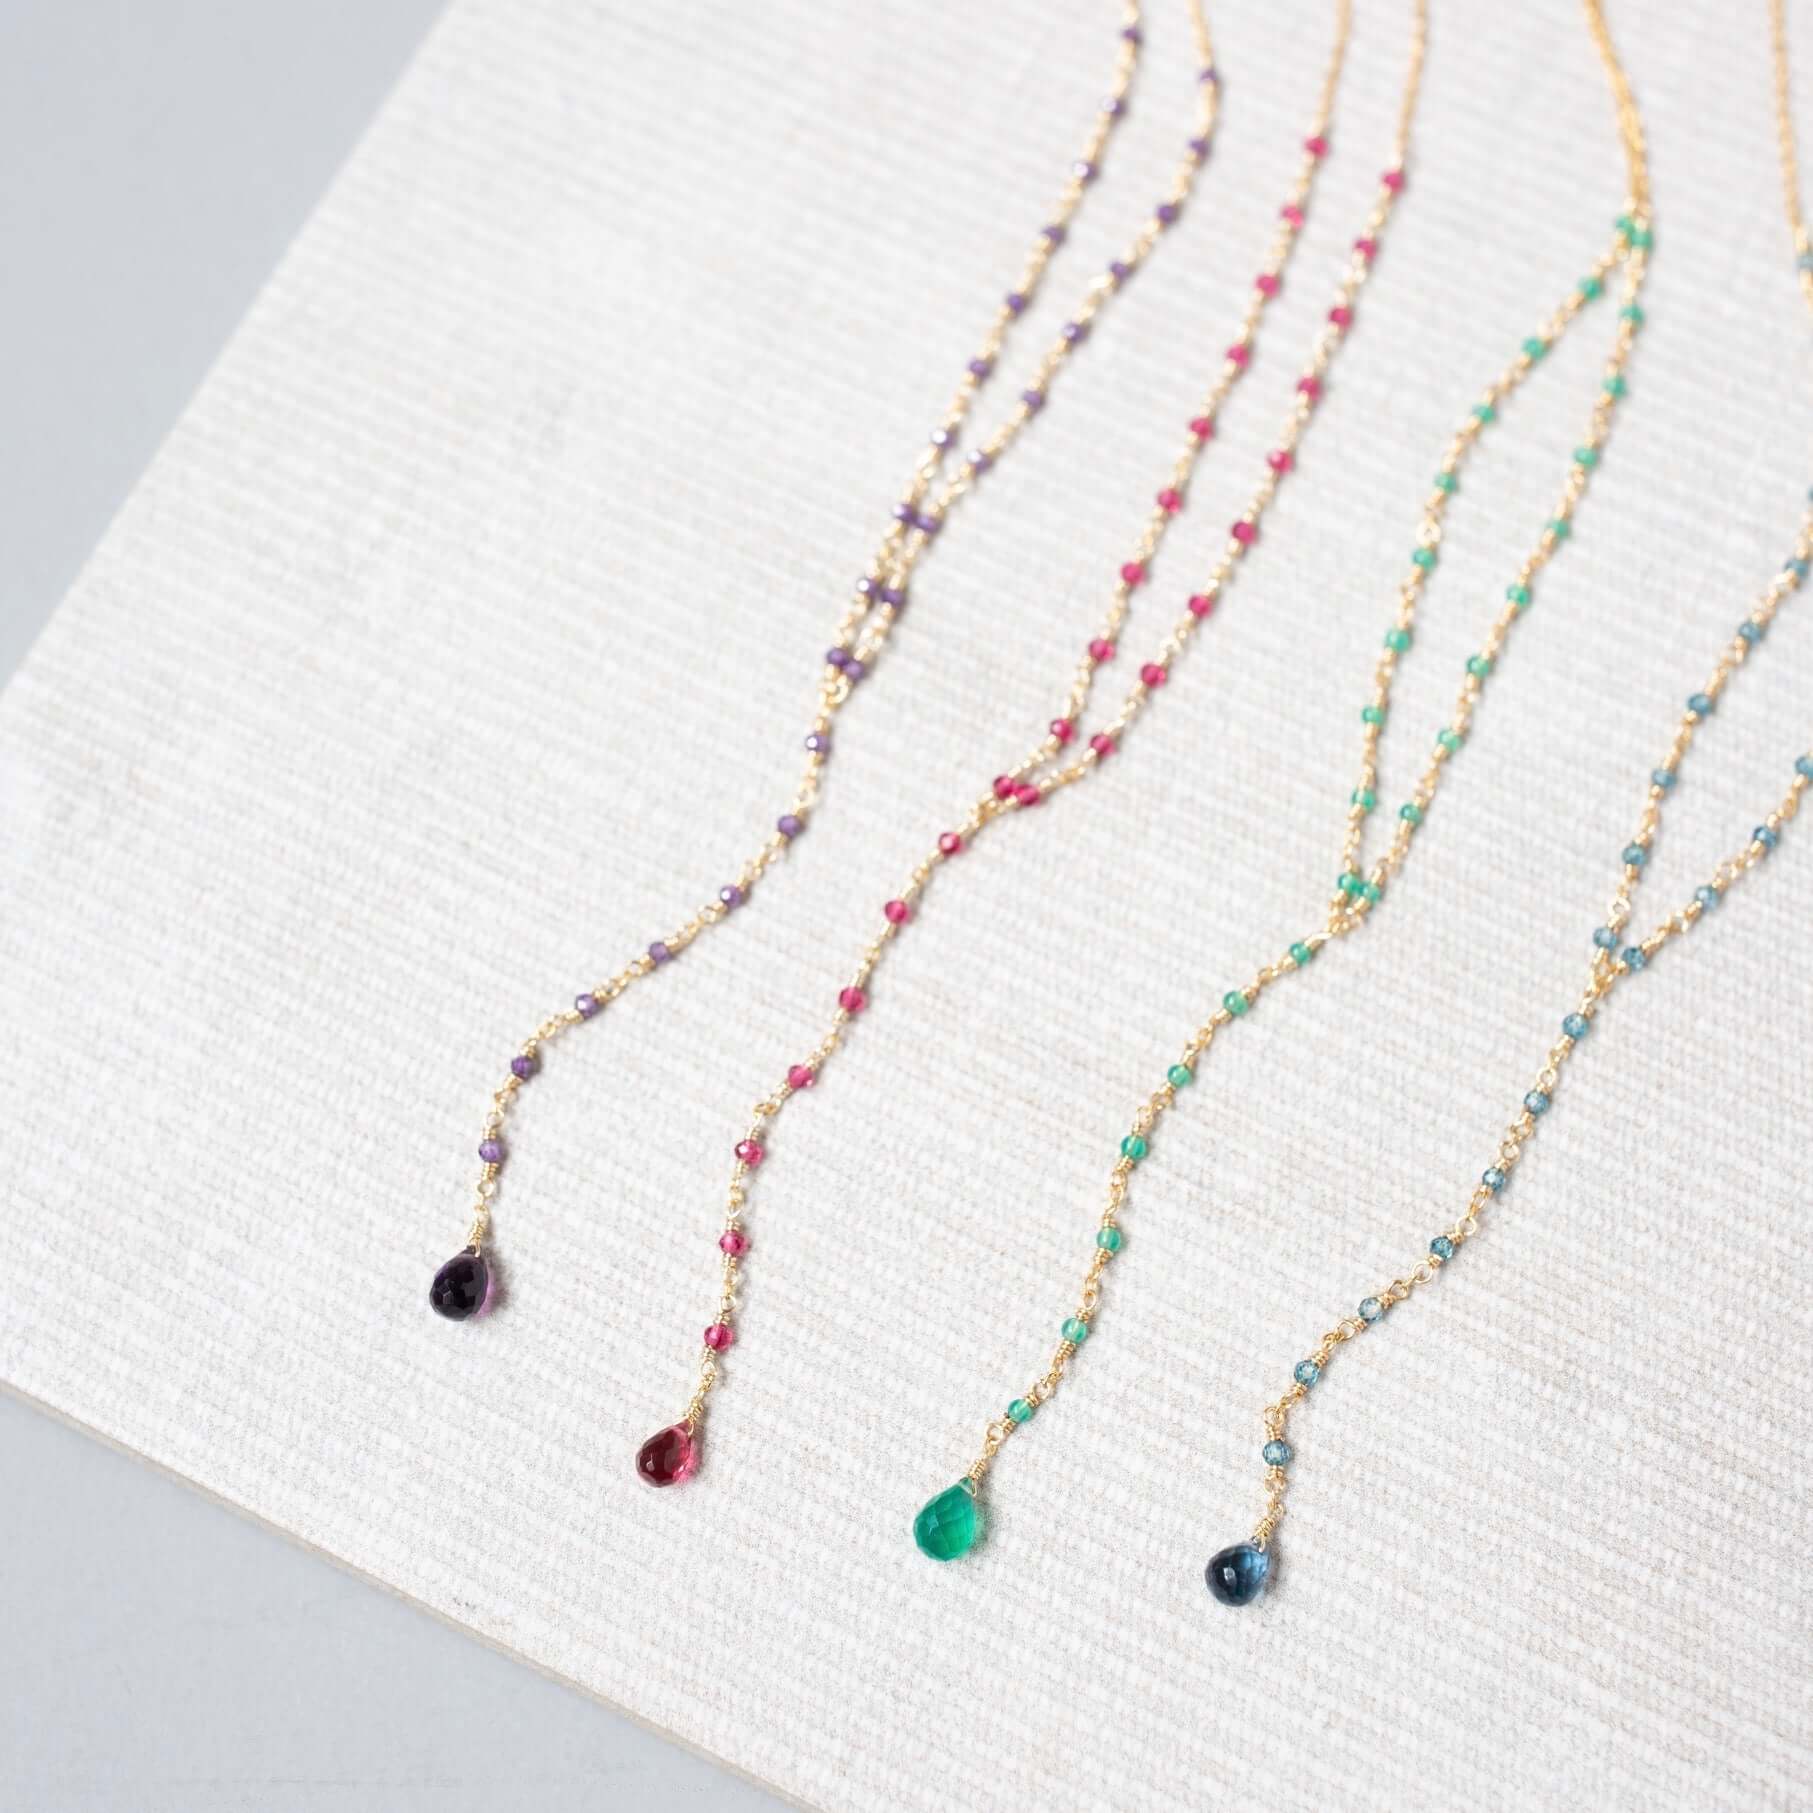 Set against a clean white background, lolite, amethyst, pink tourmaline quartz, and green onyx necklaces showcase their unique beauty